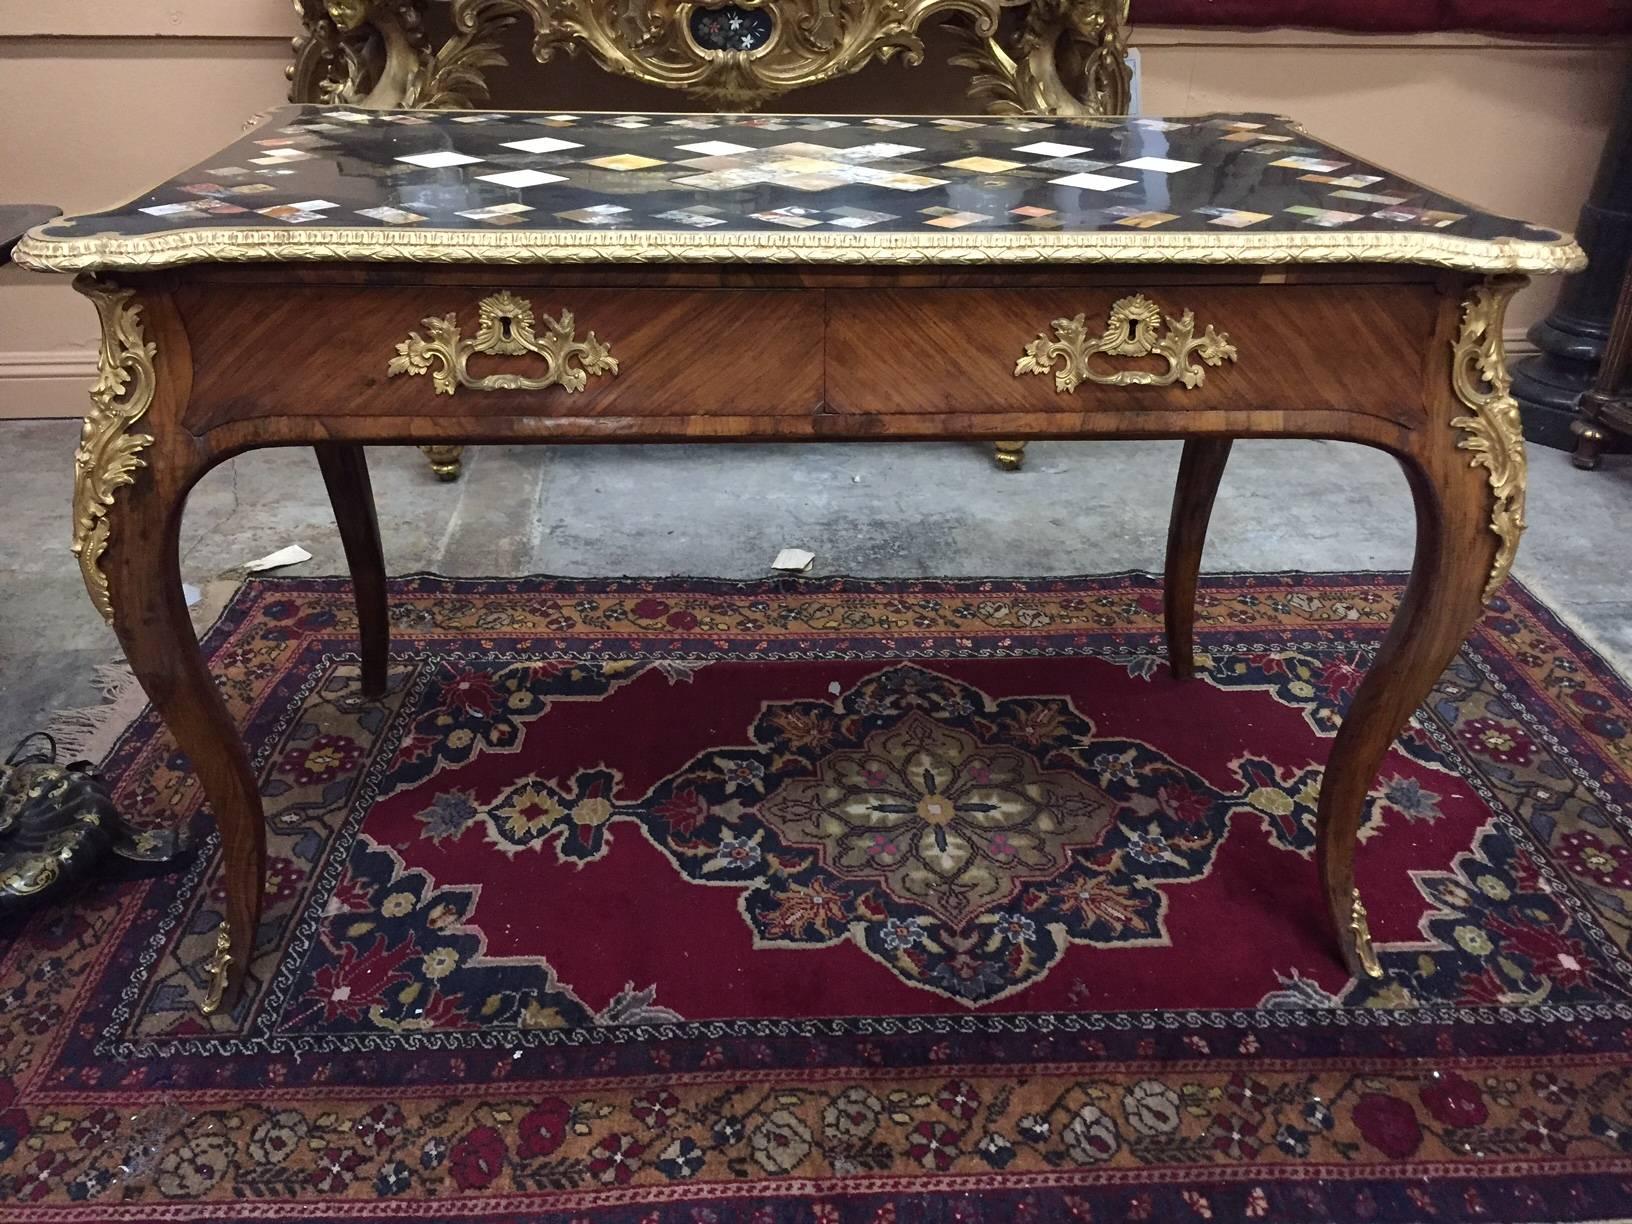 Exquisite 19th century French Louis XV style ormolu-mounted kingwood bureau plat. The impressive marble inlaid top decorated with various pieces of exotic marble inset within a fine ormolu frame over two kingwood drawers all on four cabriole legs